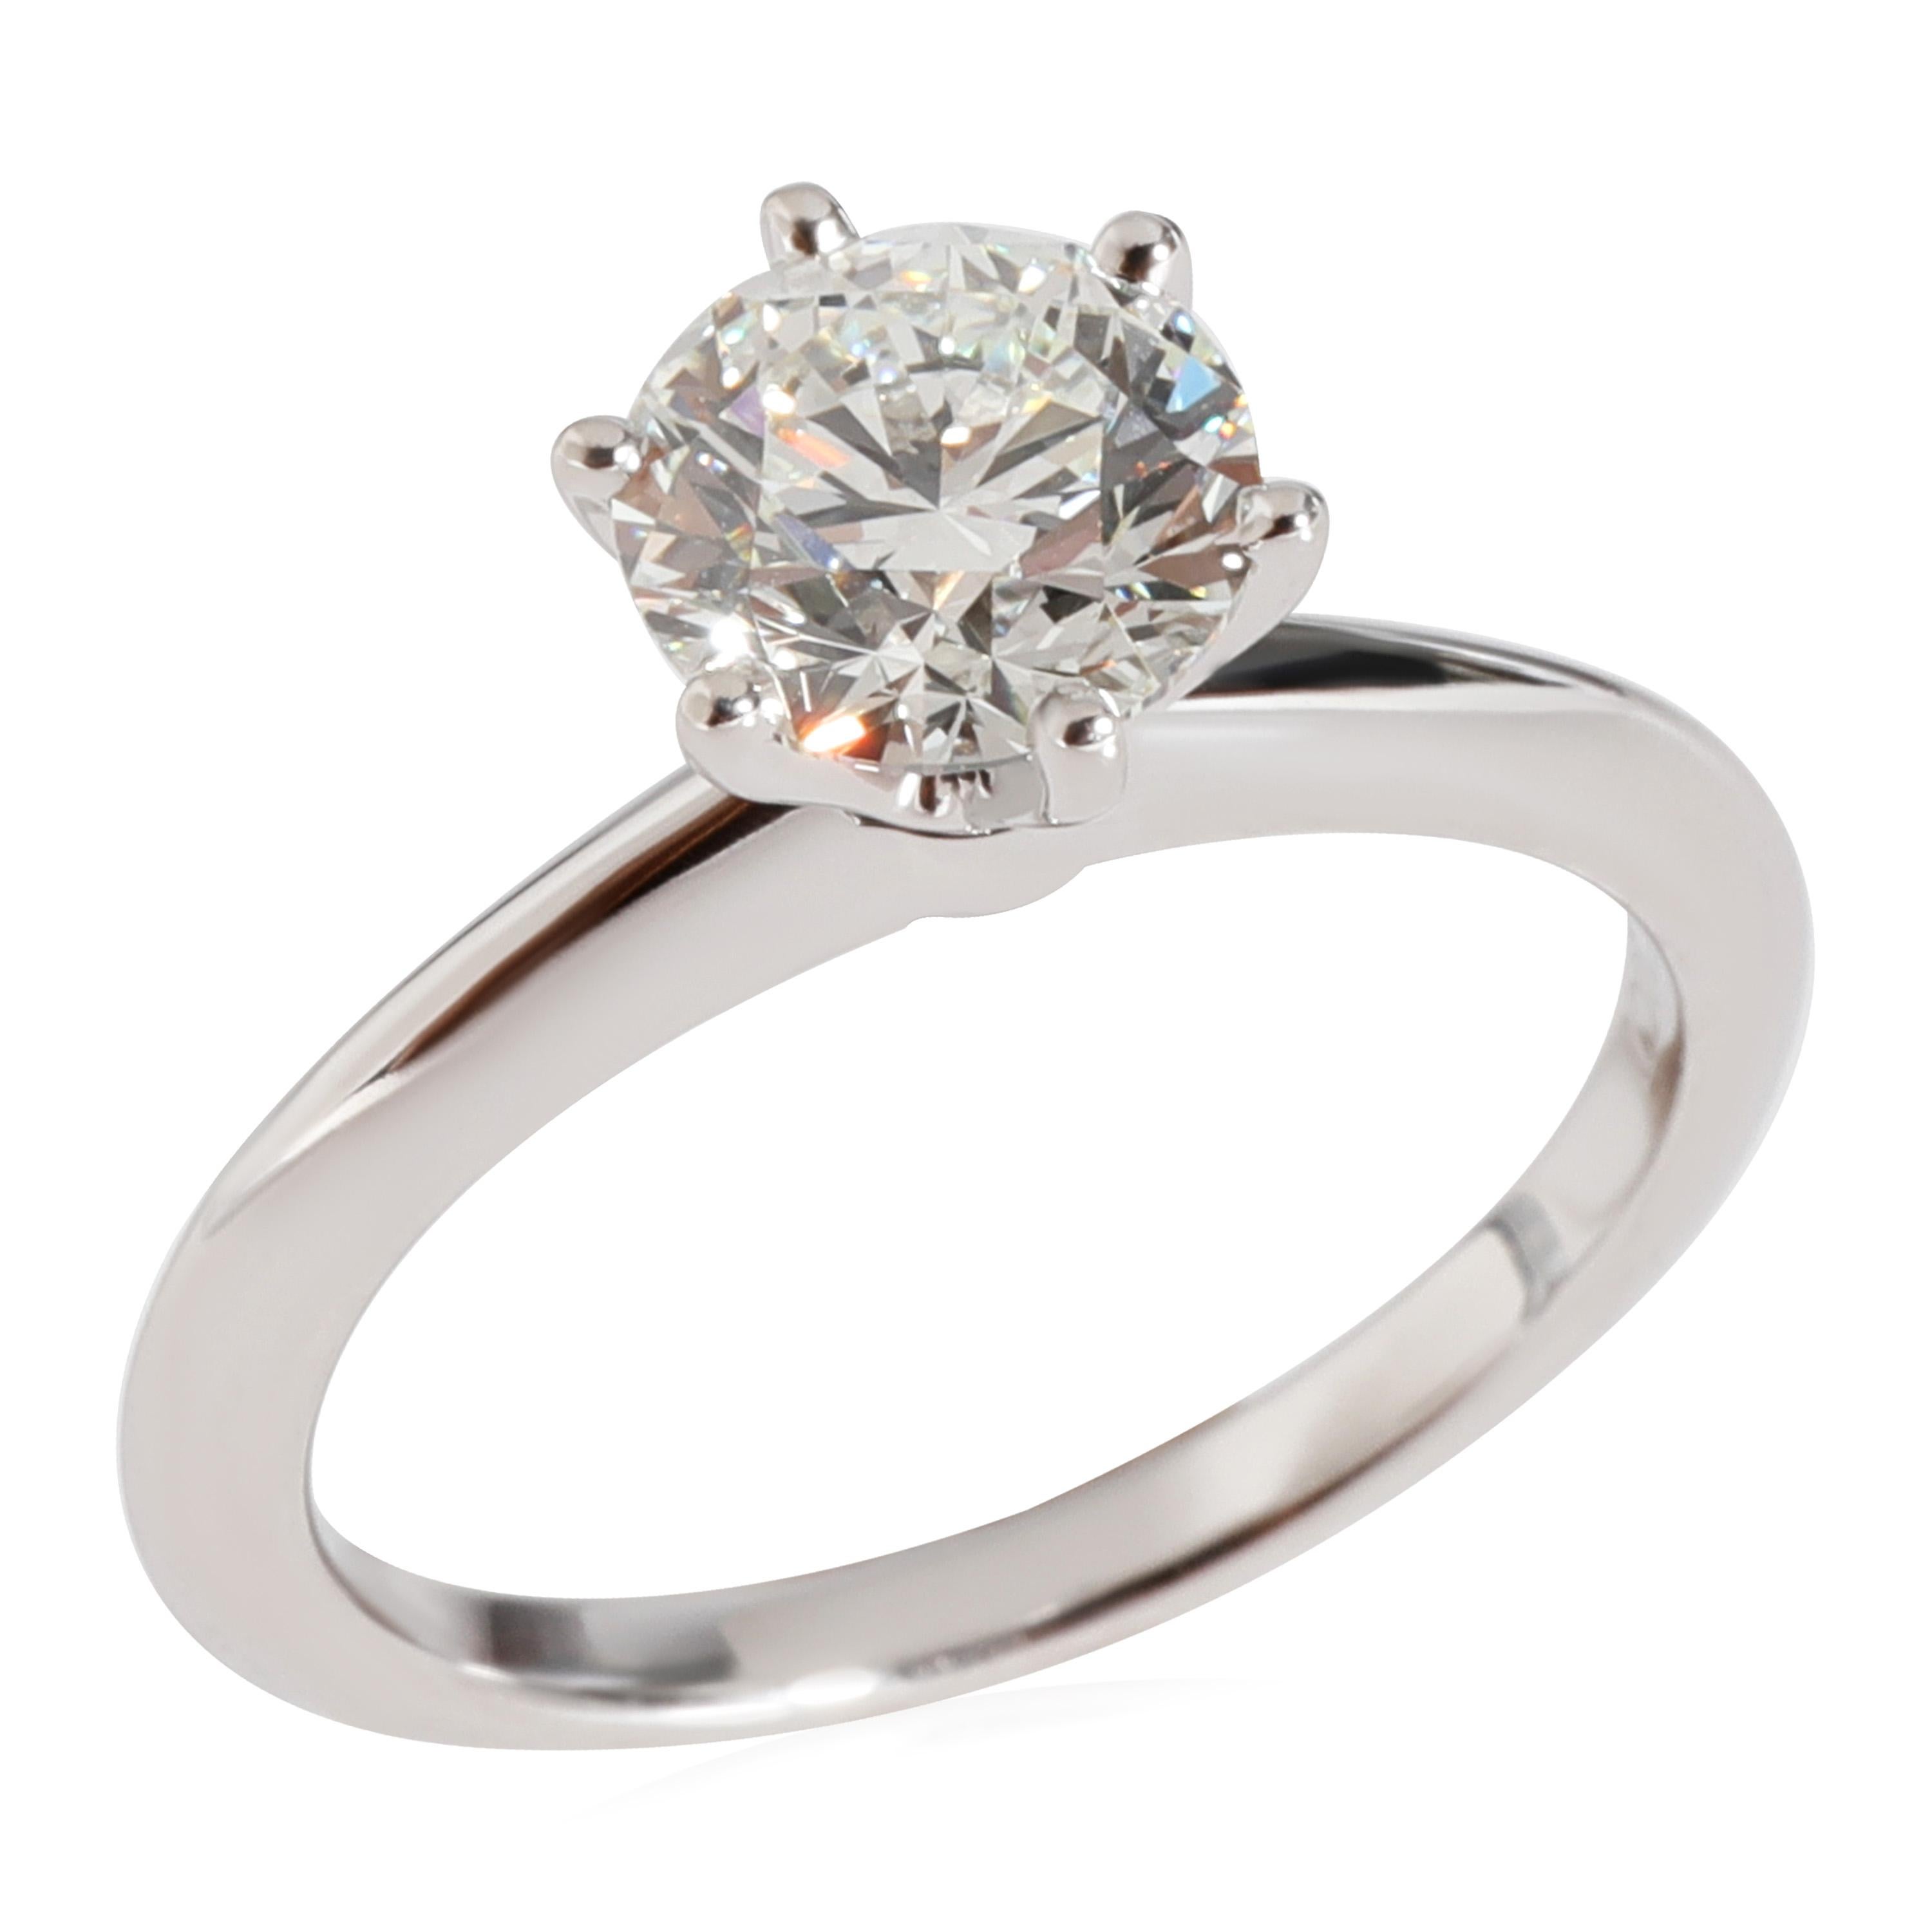 Tiffany & Co. 6 Prong Setting Diamond Solitaire Ring in Platinum

PRIMARY DETAILS
SKU: 122798
Listing Title: Tiffany & Co. 6 Prong Setting Diamond Solitaire Ring in Platinum
Condition Description: Retails for 16800 USD. In excellent condition and